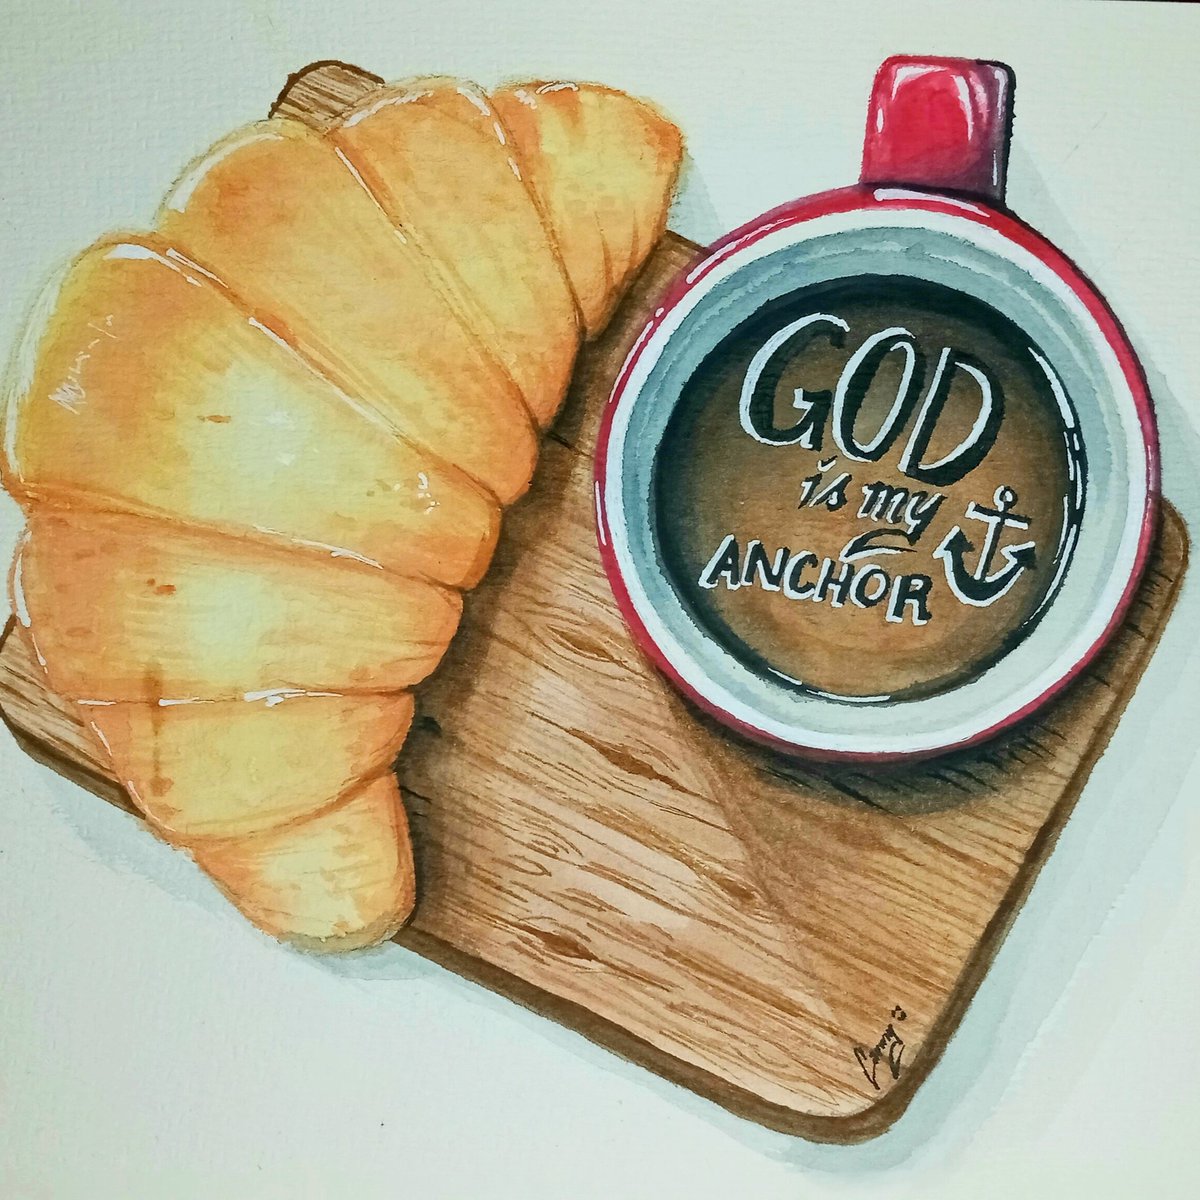 'We have this hope as an anchor for the soul, firm and secure...'
~ Hebrews 6:19

#anchored #graceofGod #facingthestorm #Godisgood #Godisourstrength #Godisourhope #JesusisLord #coffee #coffeecup #coffeepainting #coffeeart #coffeewatercolor #croissant #watercolor #art #painting